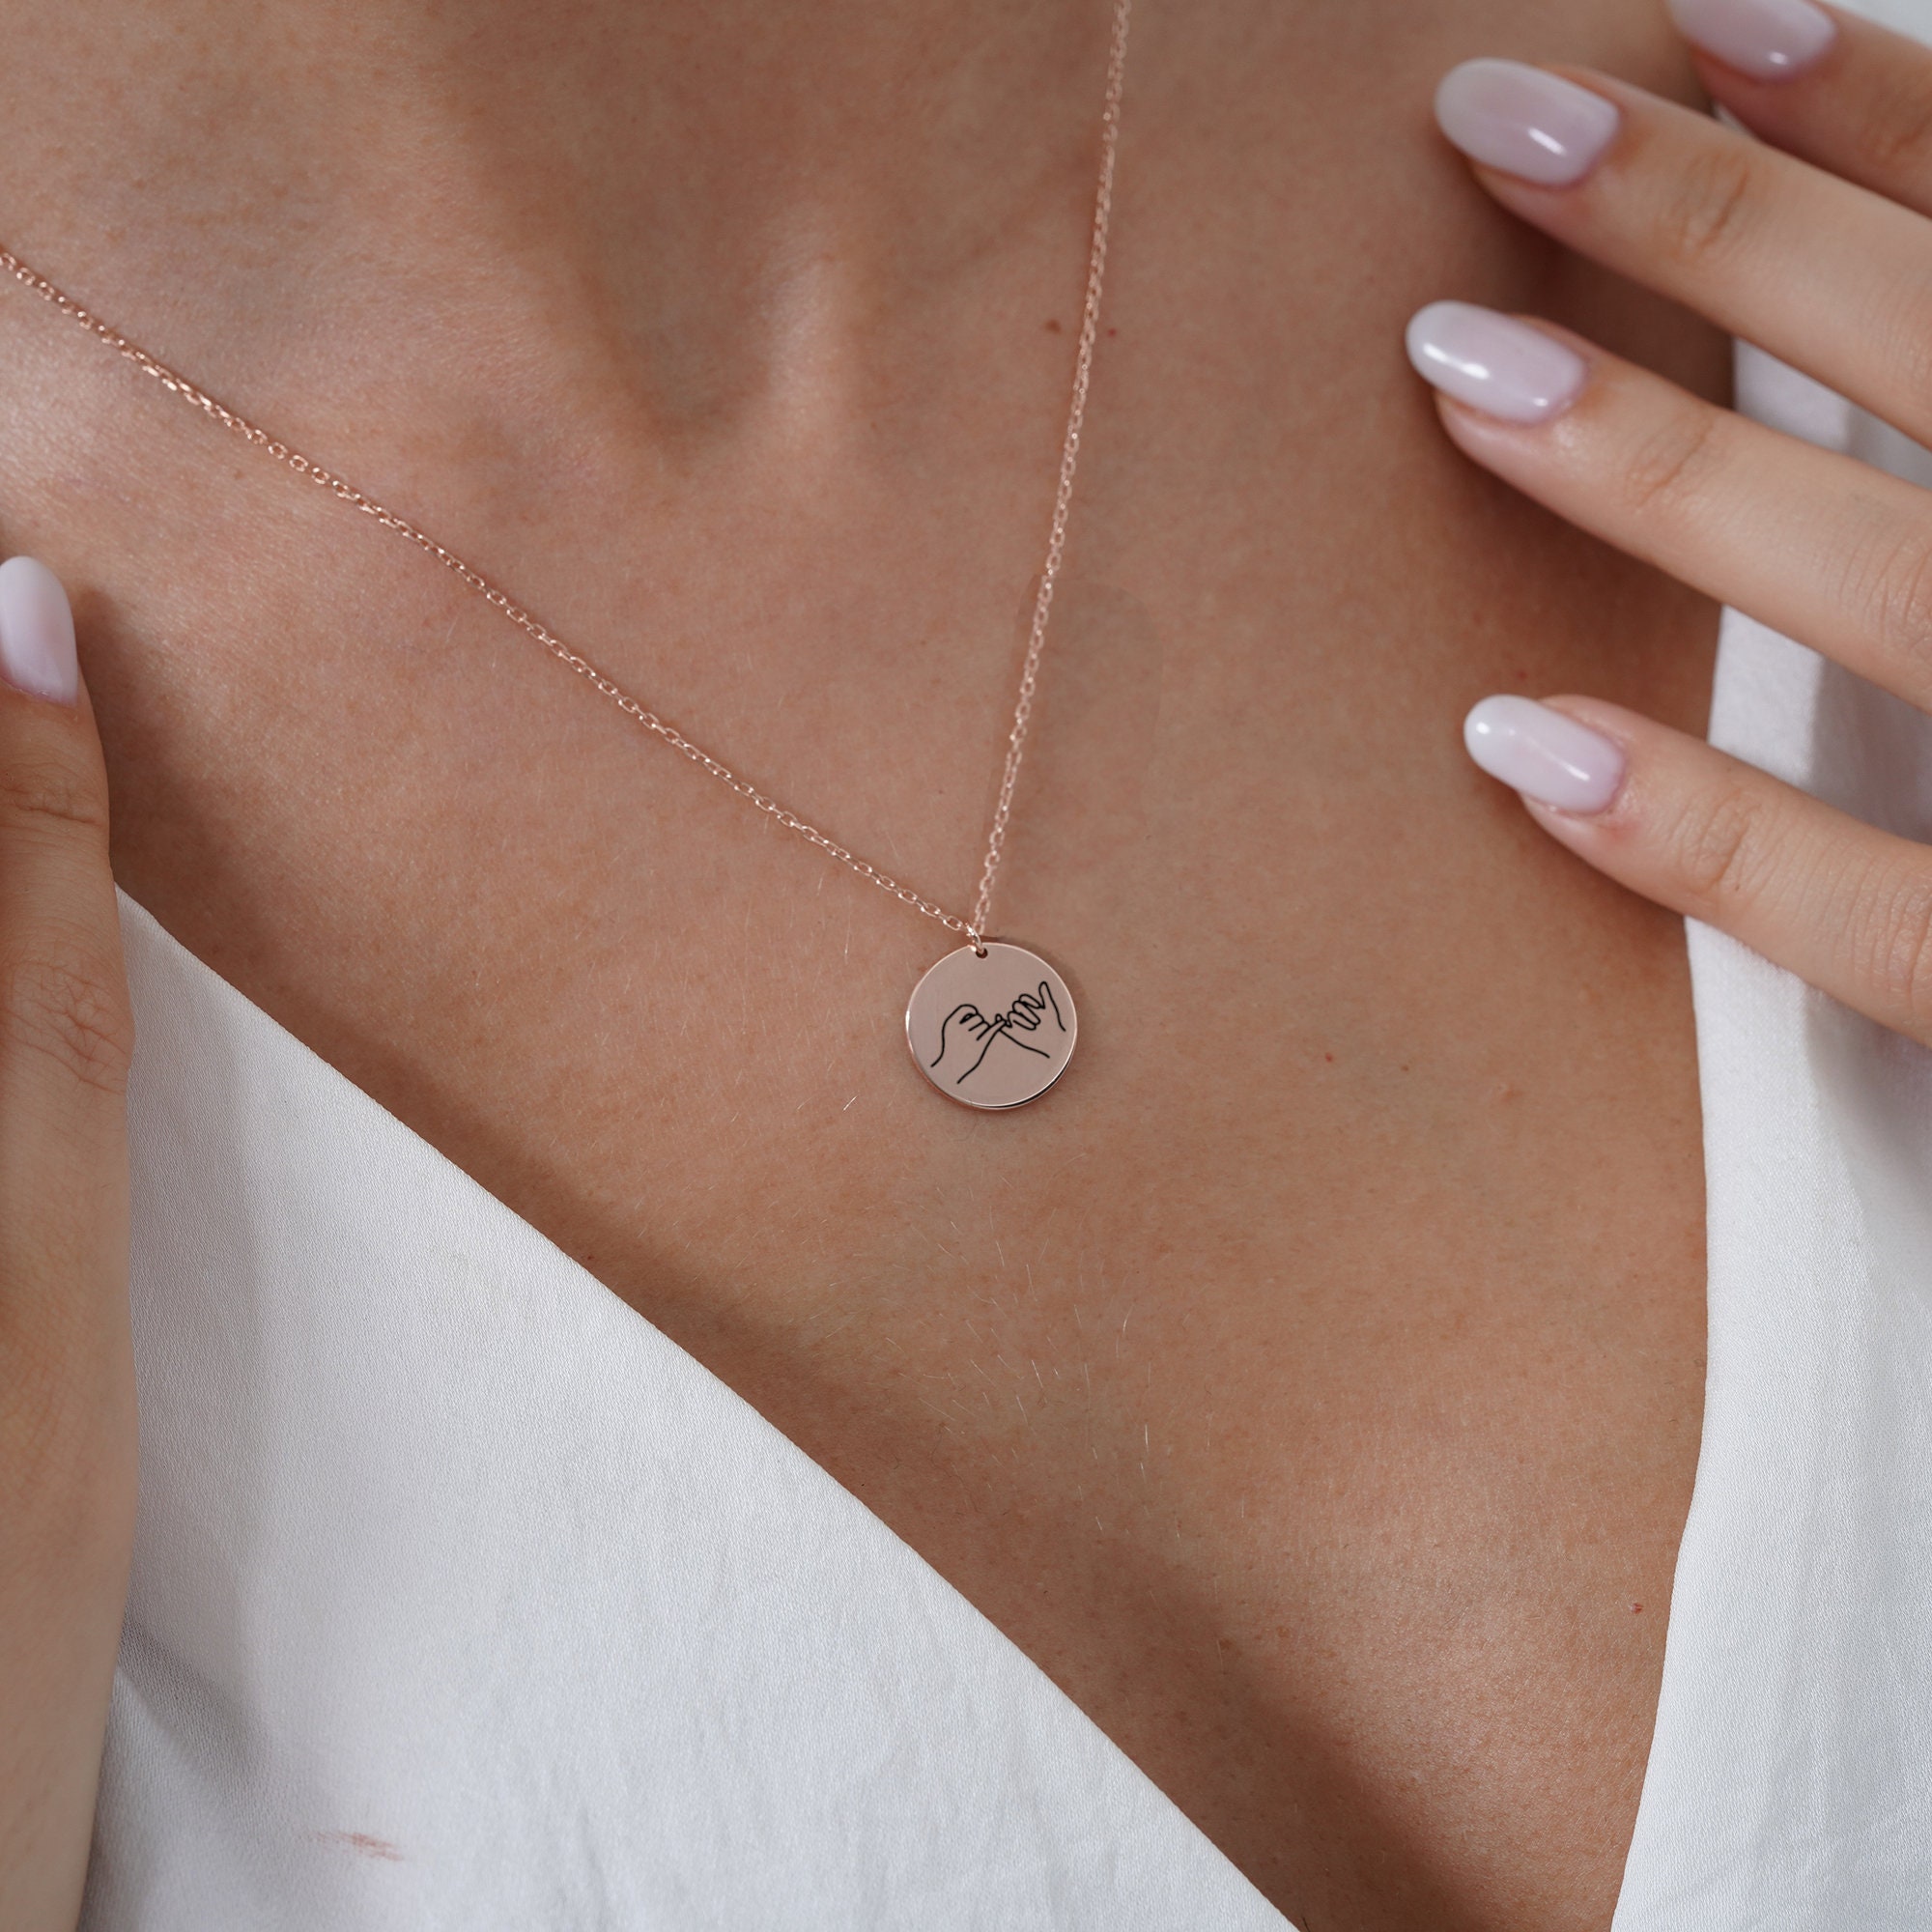 Pinky Promise Necklace Personalized Necklace for Her Pinky Swear Friendship Necklace Best Friend Gifts Disc Necklace Coin Charm Pendant